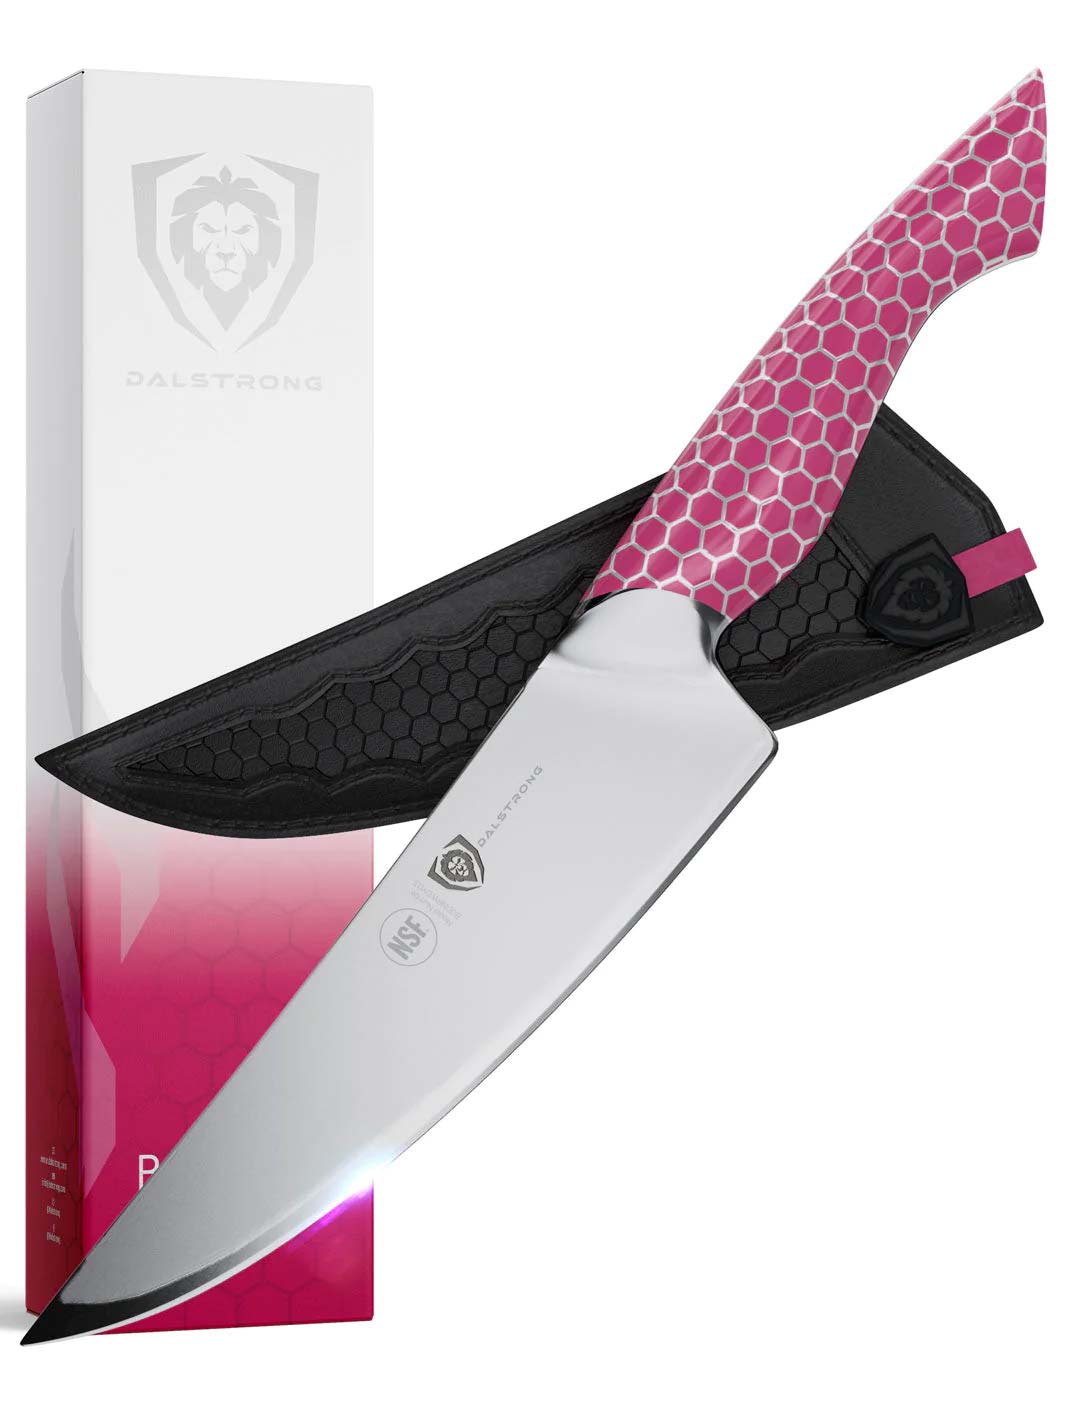 Dalstrong frost fire series 8 inch chef knife with pink handle and black sheath in front of it's premium packaging.